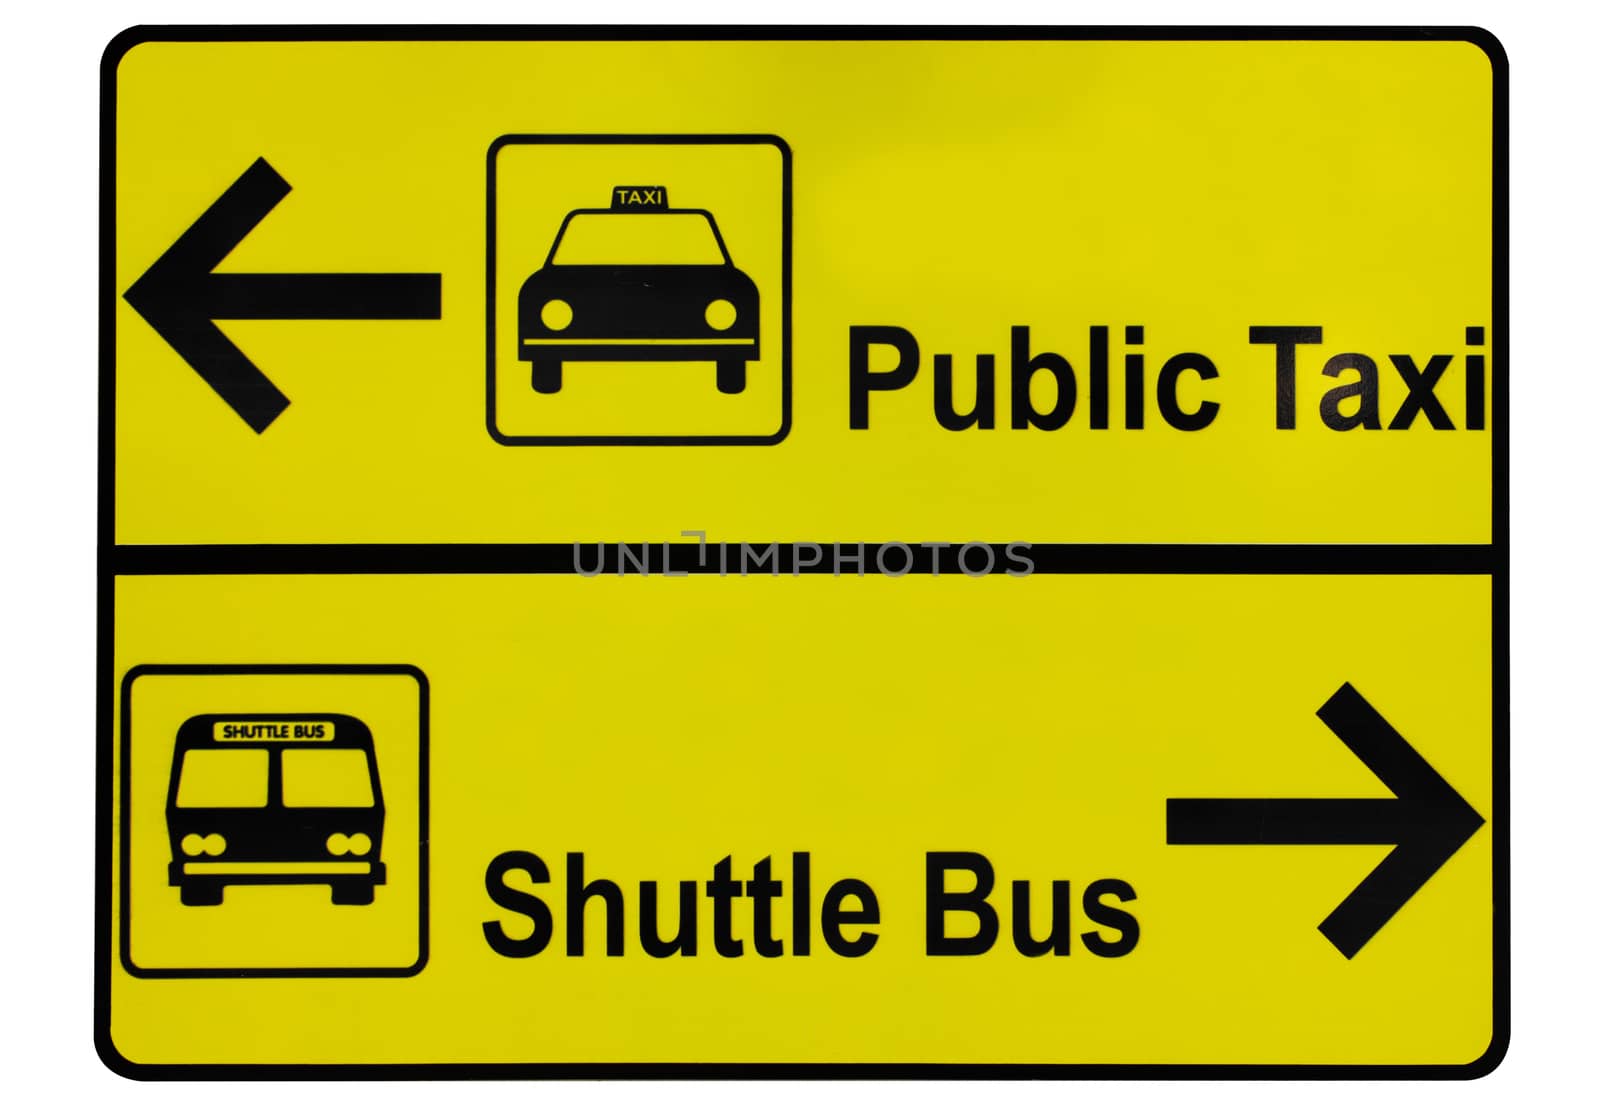 the bus and public taxi arrow label